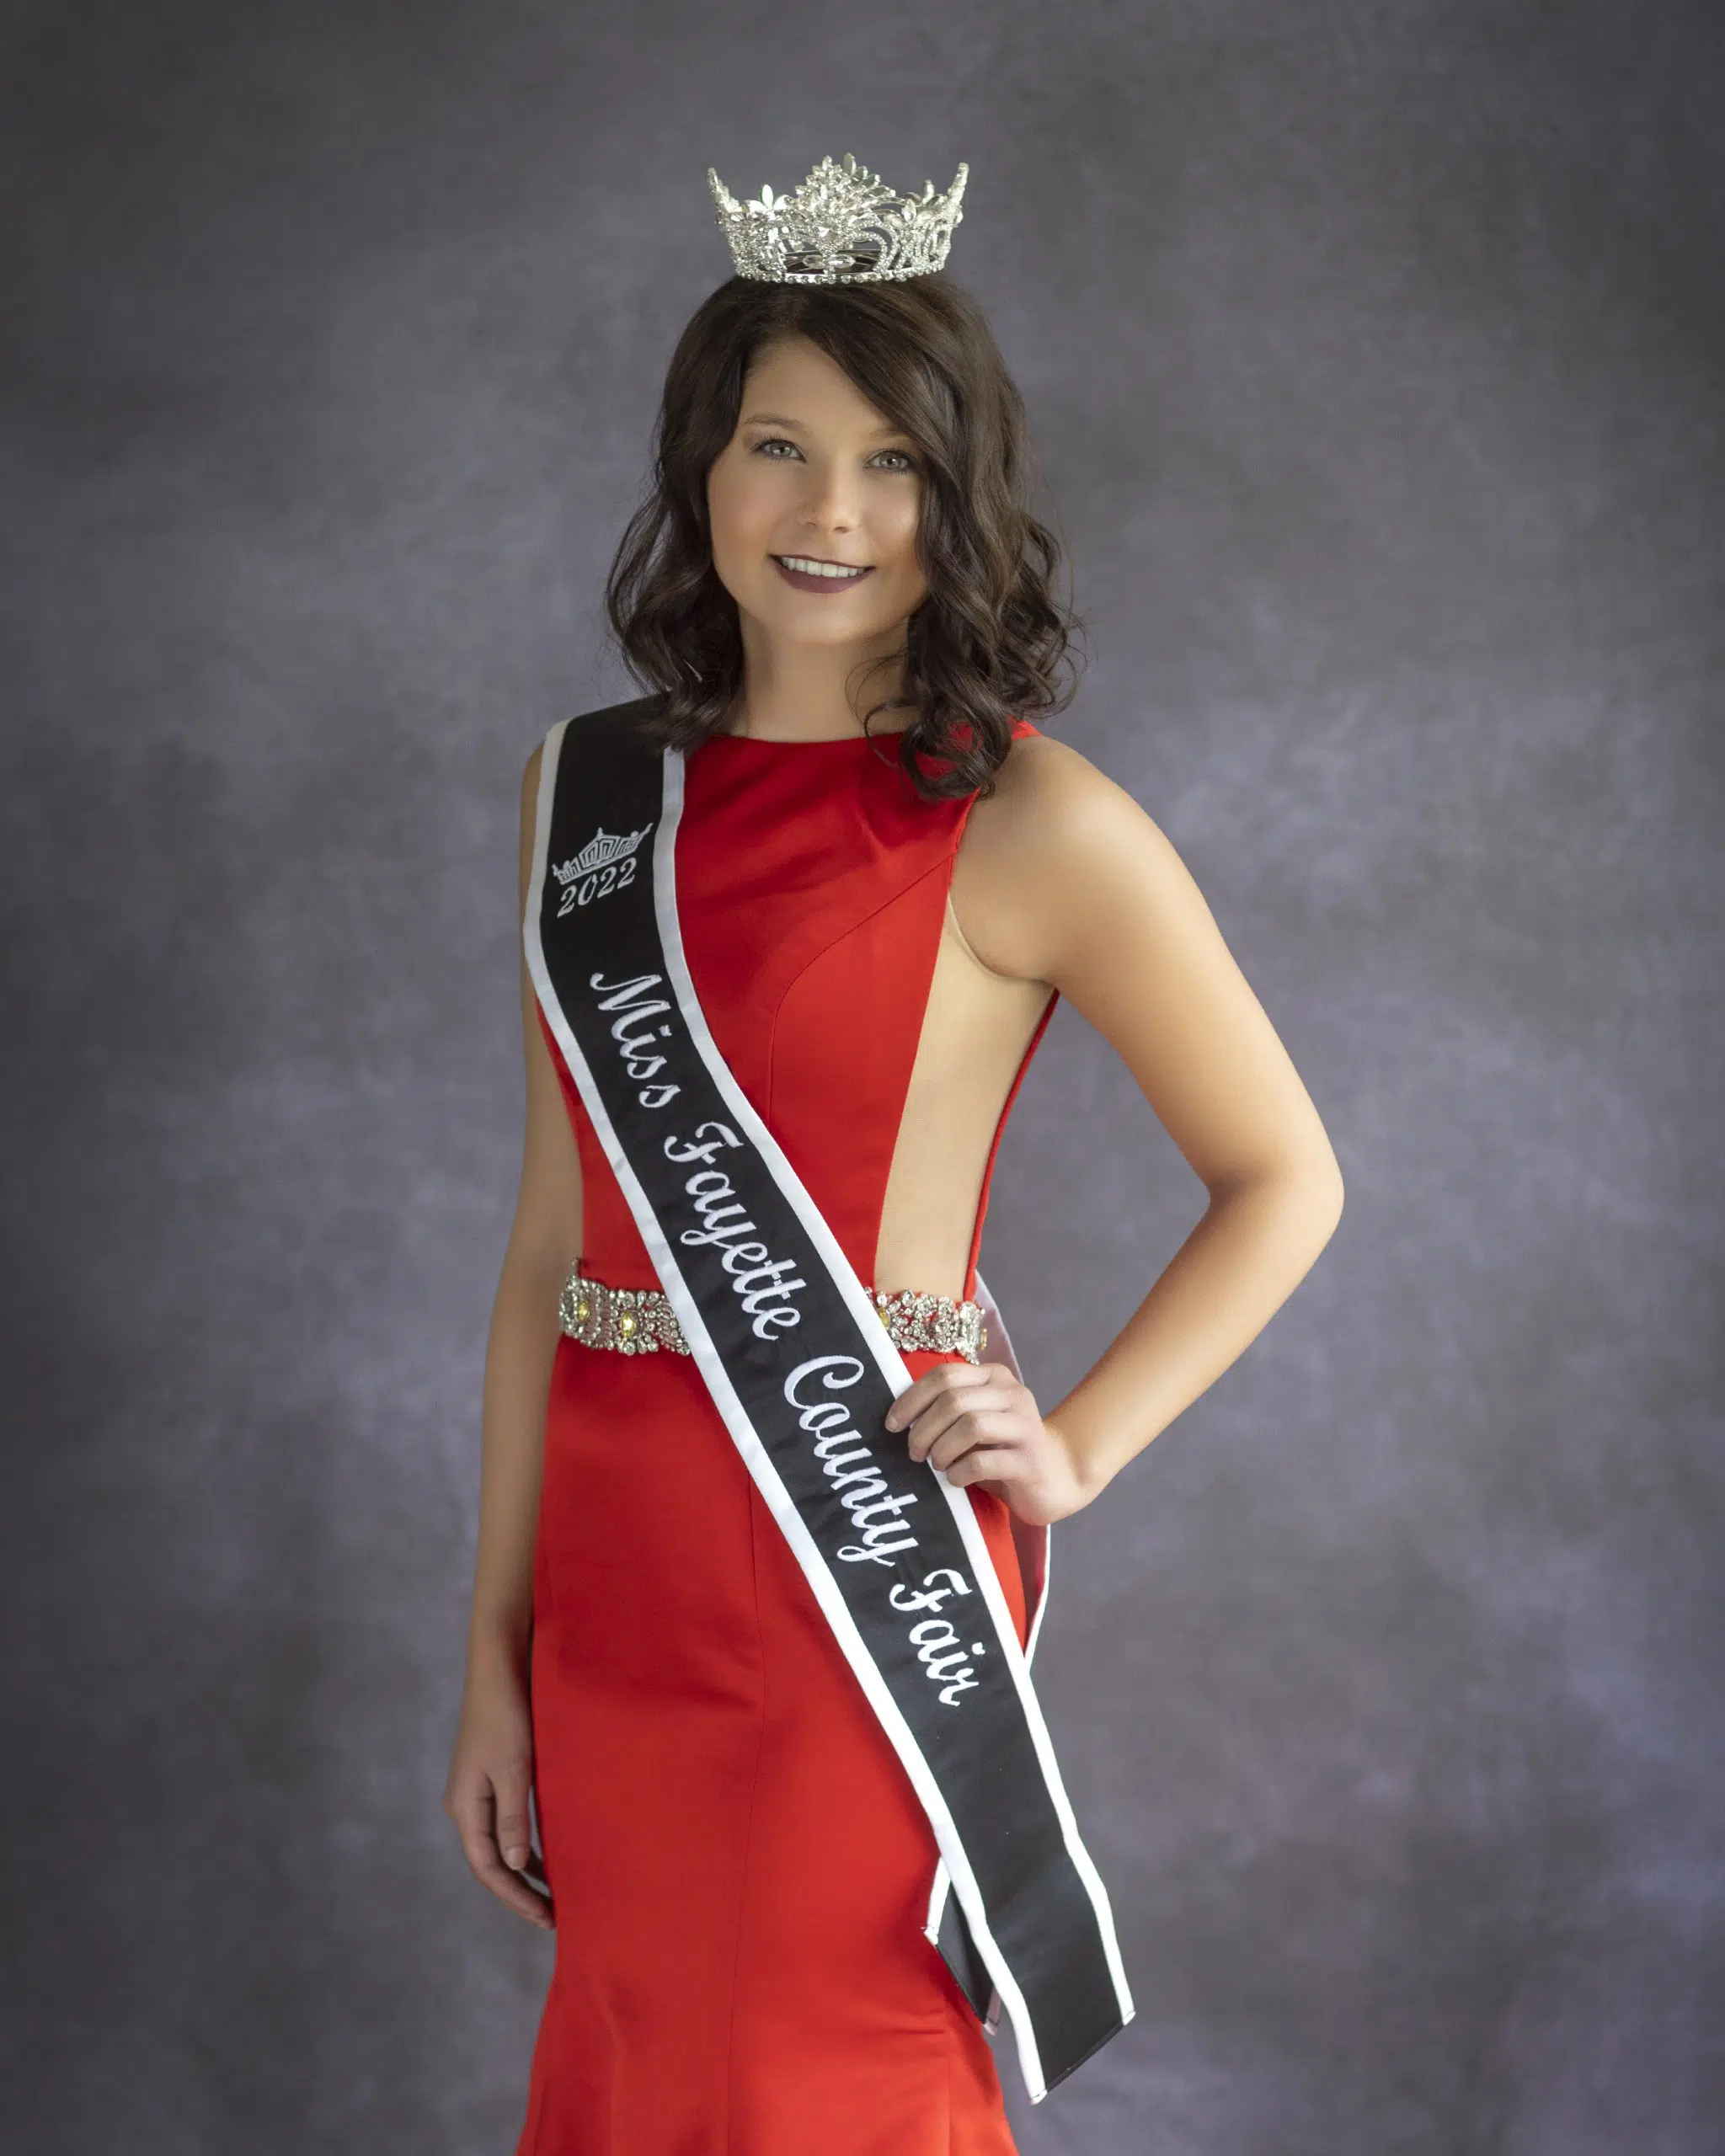 Miss Fayette County Fair Queen 2022 Anna Kramer will compete at the